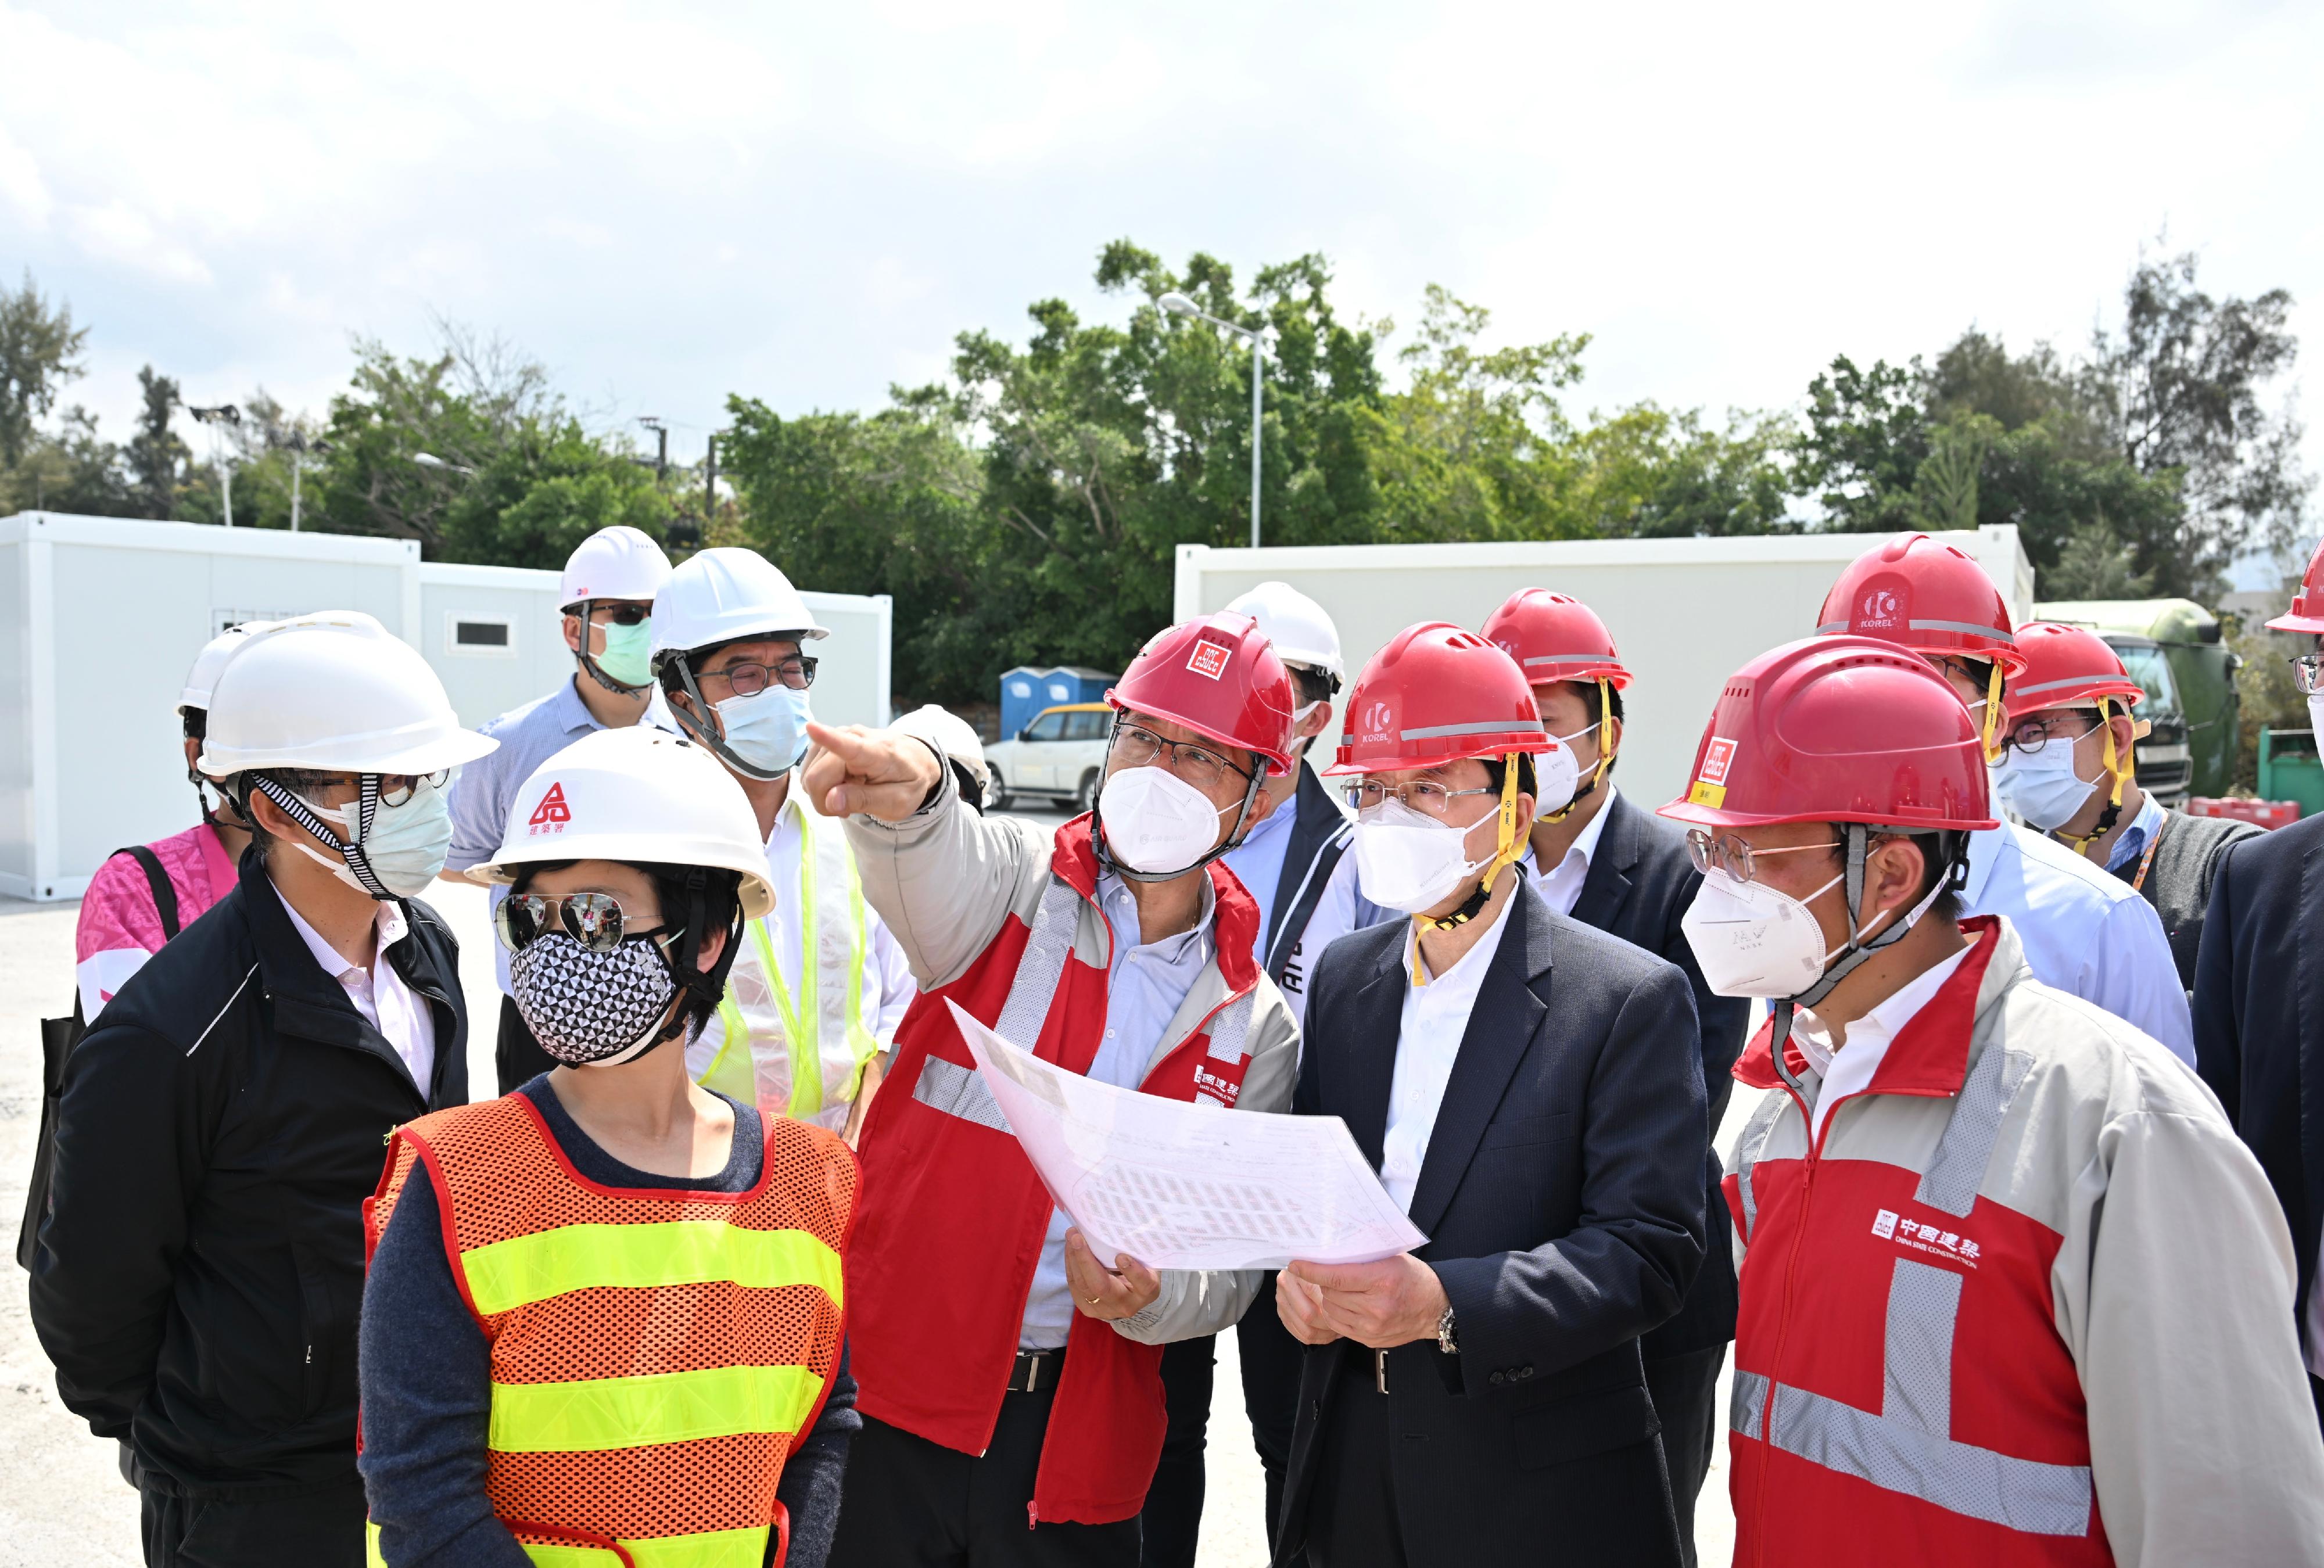 The Chief Secretary for Administration, Mr John Lee, visited the community isolation and treatment facilities constructed with the support of the Central Government in Tsing Yi, Lok Ma Chau and San Tin today (March 1). Photo shows Mr Lee (front row, second right), accompanied by the Secretary for Development, Mr Michael Wong (second row, second left), and the Director of Architectural Services, Ms Winnie Ho (front row, first left), receiving a briefing from a representative of the contractor on the construction of facilities in San Tin.